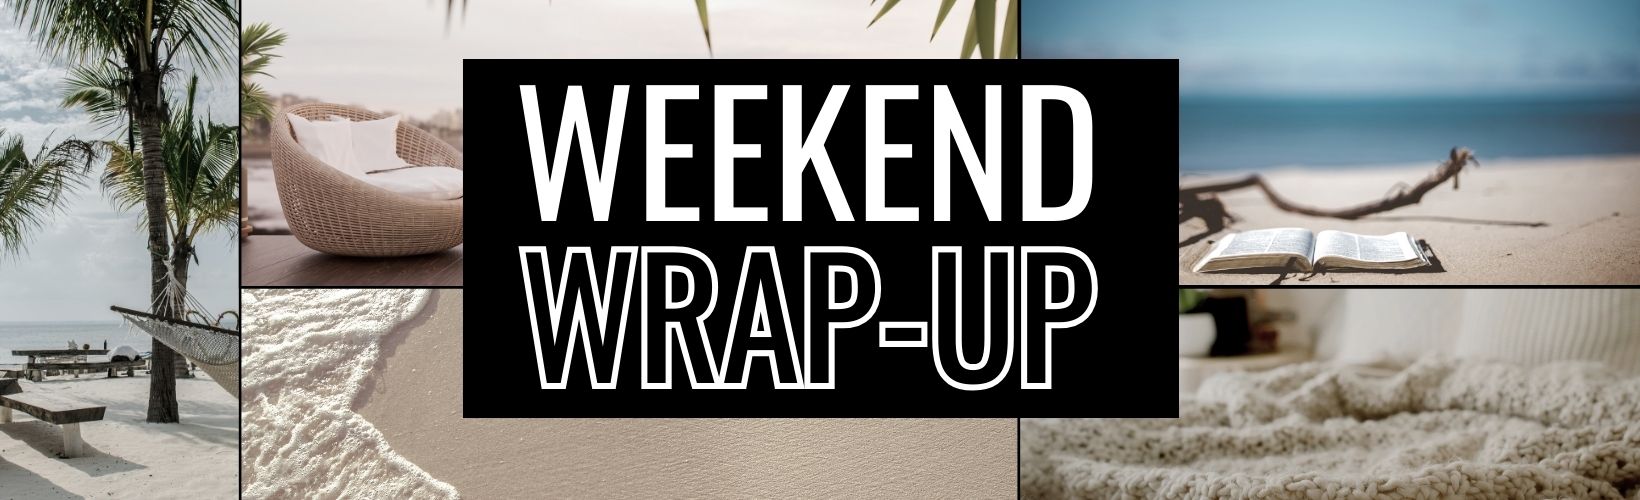 Weekend Wrap-Up: Giving Thanks and Looking Ahead